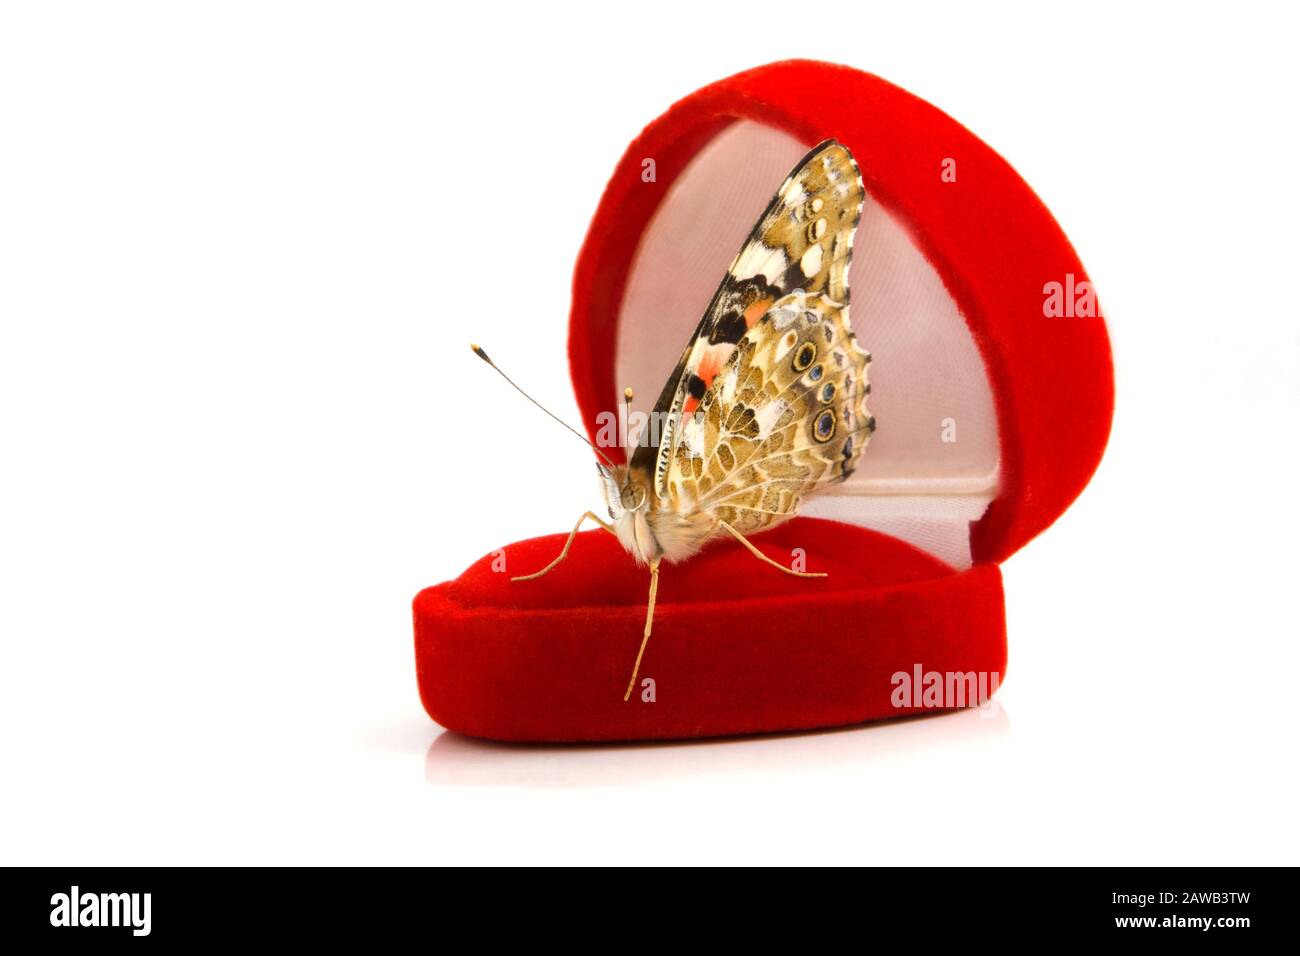 Image of a butterfly sitting on a red gift box for rings Stock Photo